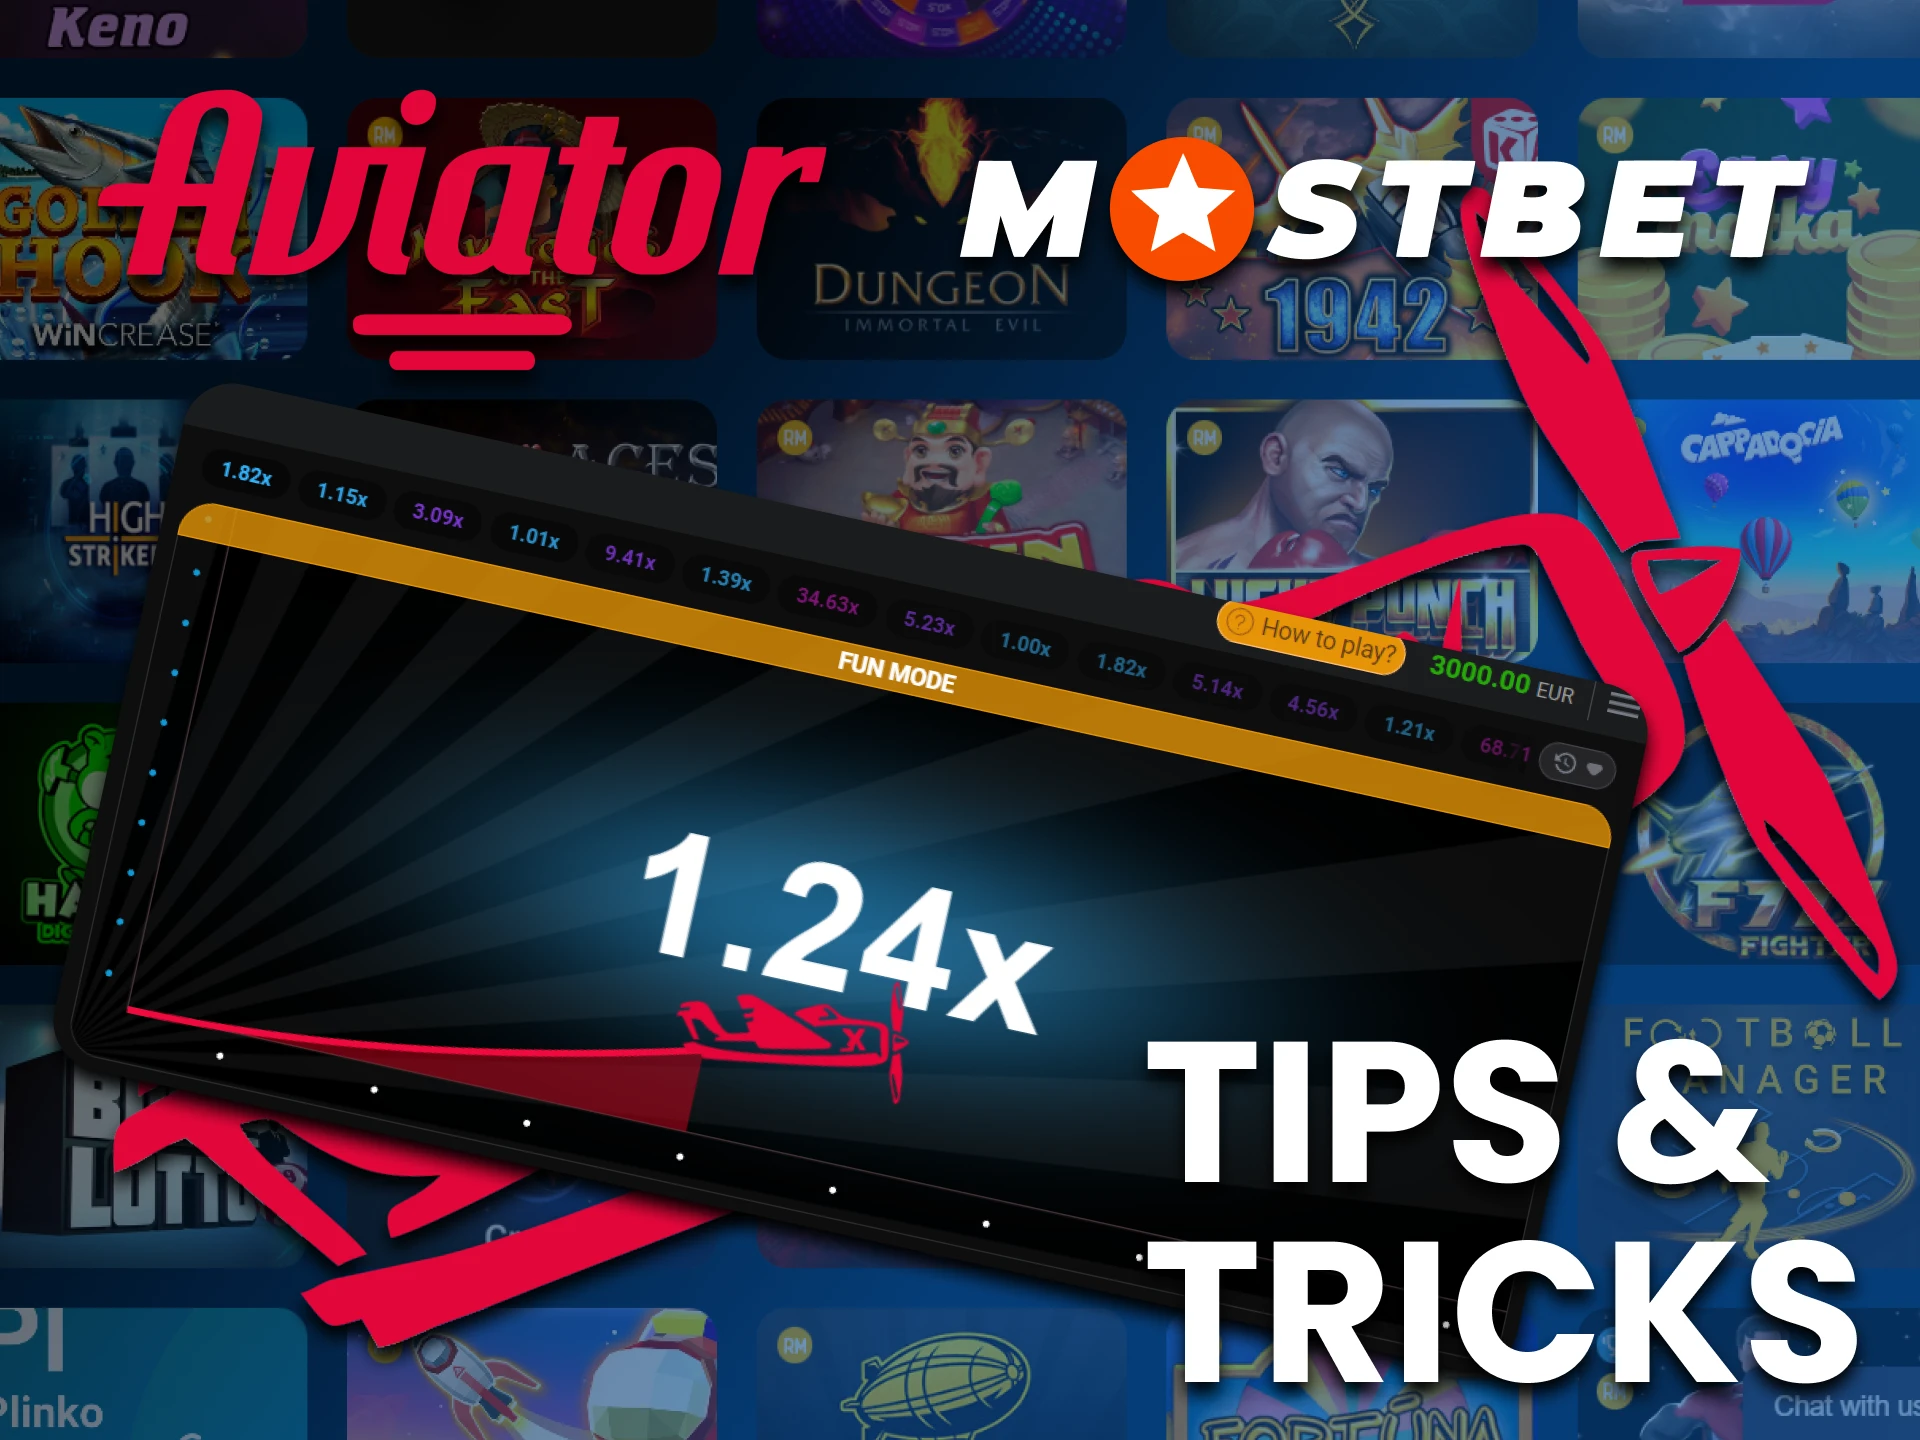 Follow the tips to increase your profit from playing Aviator on Mostbet.